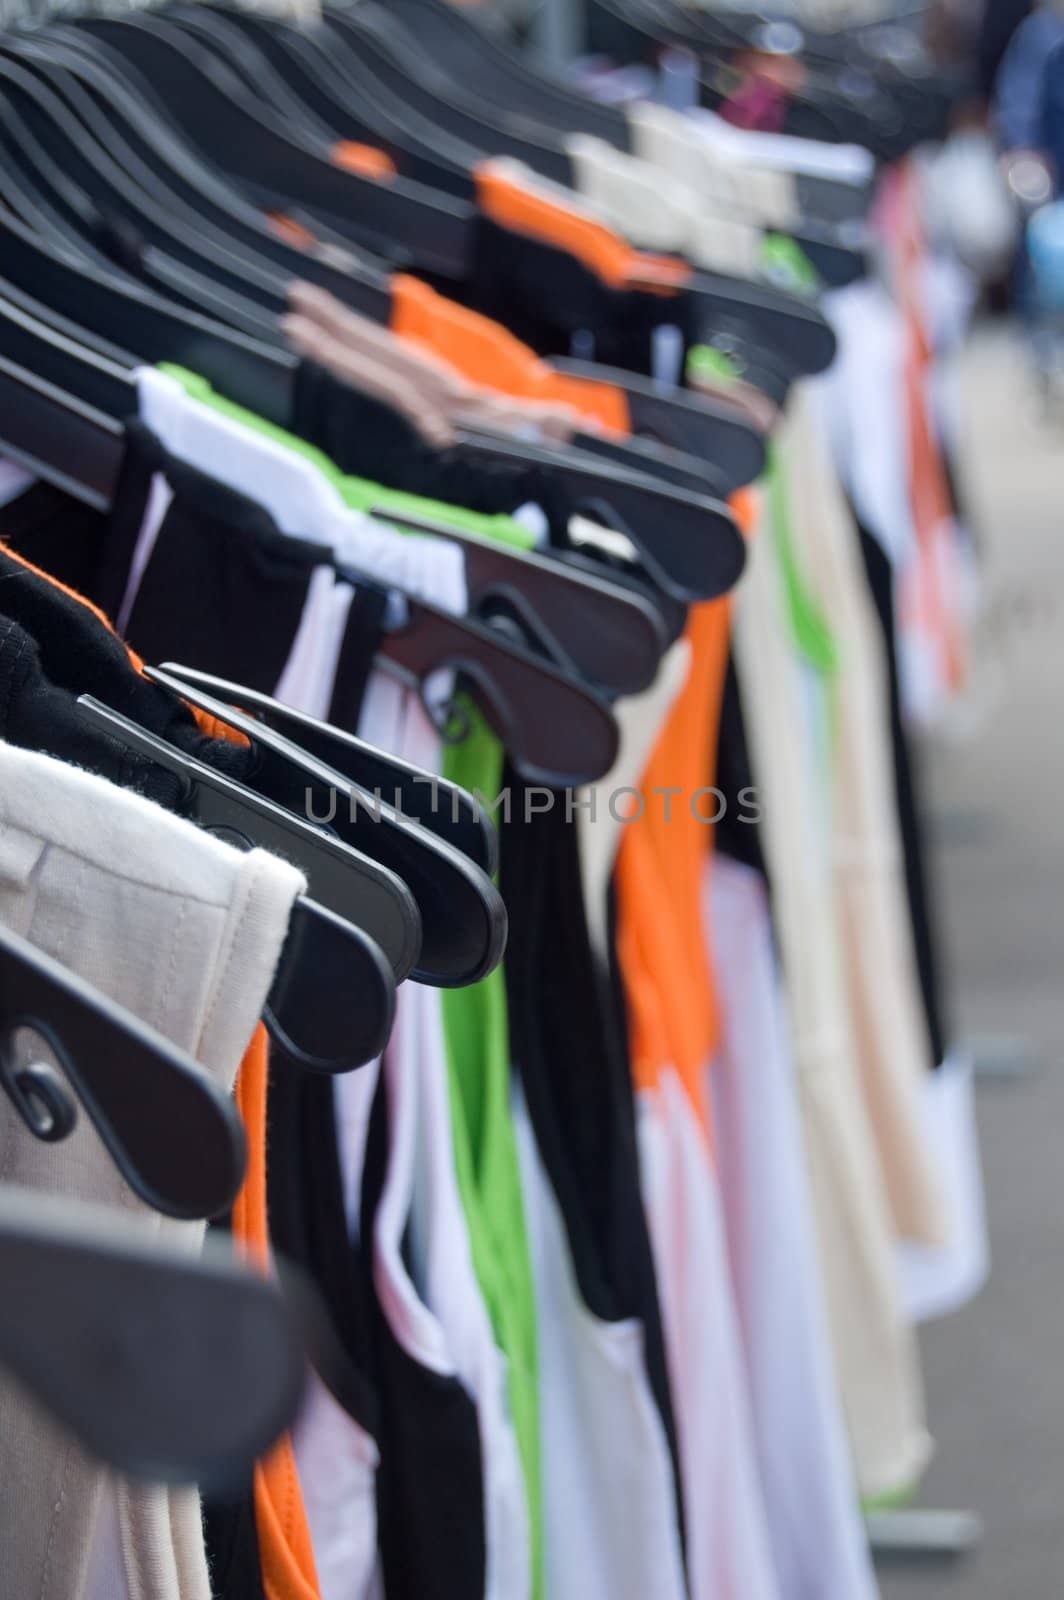 shirts hanging in a row on market